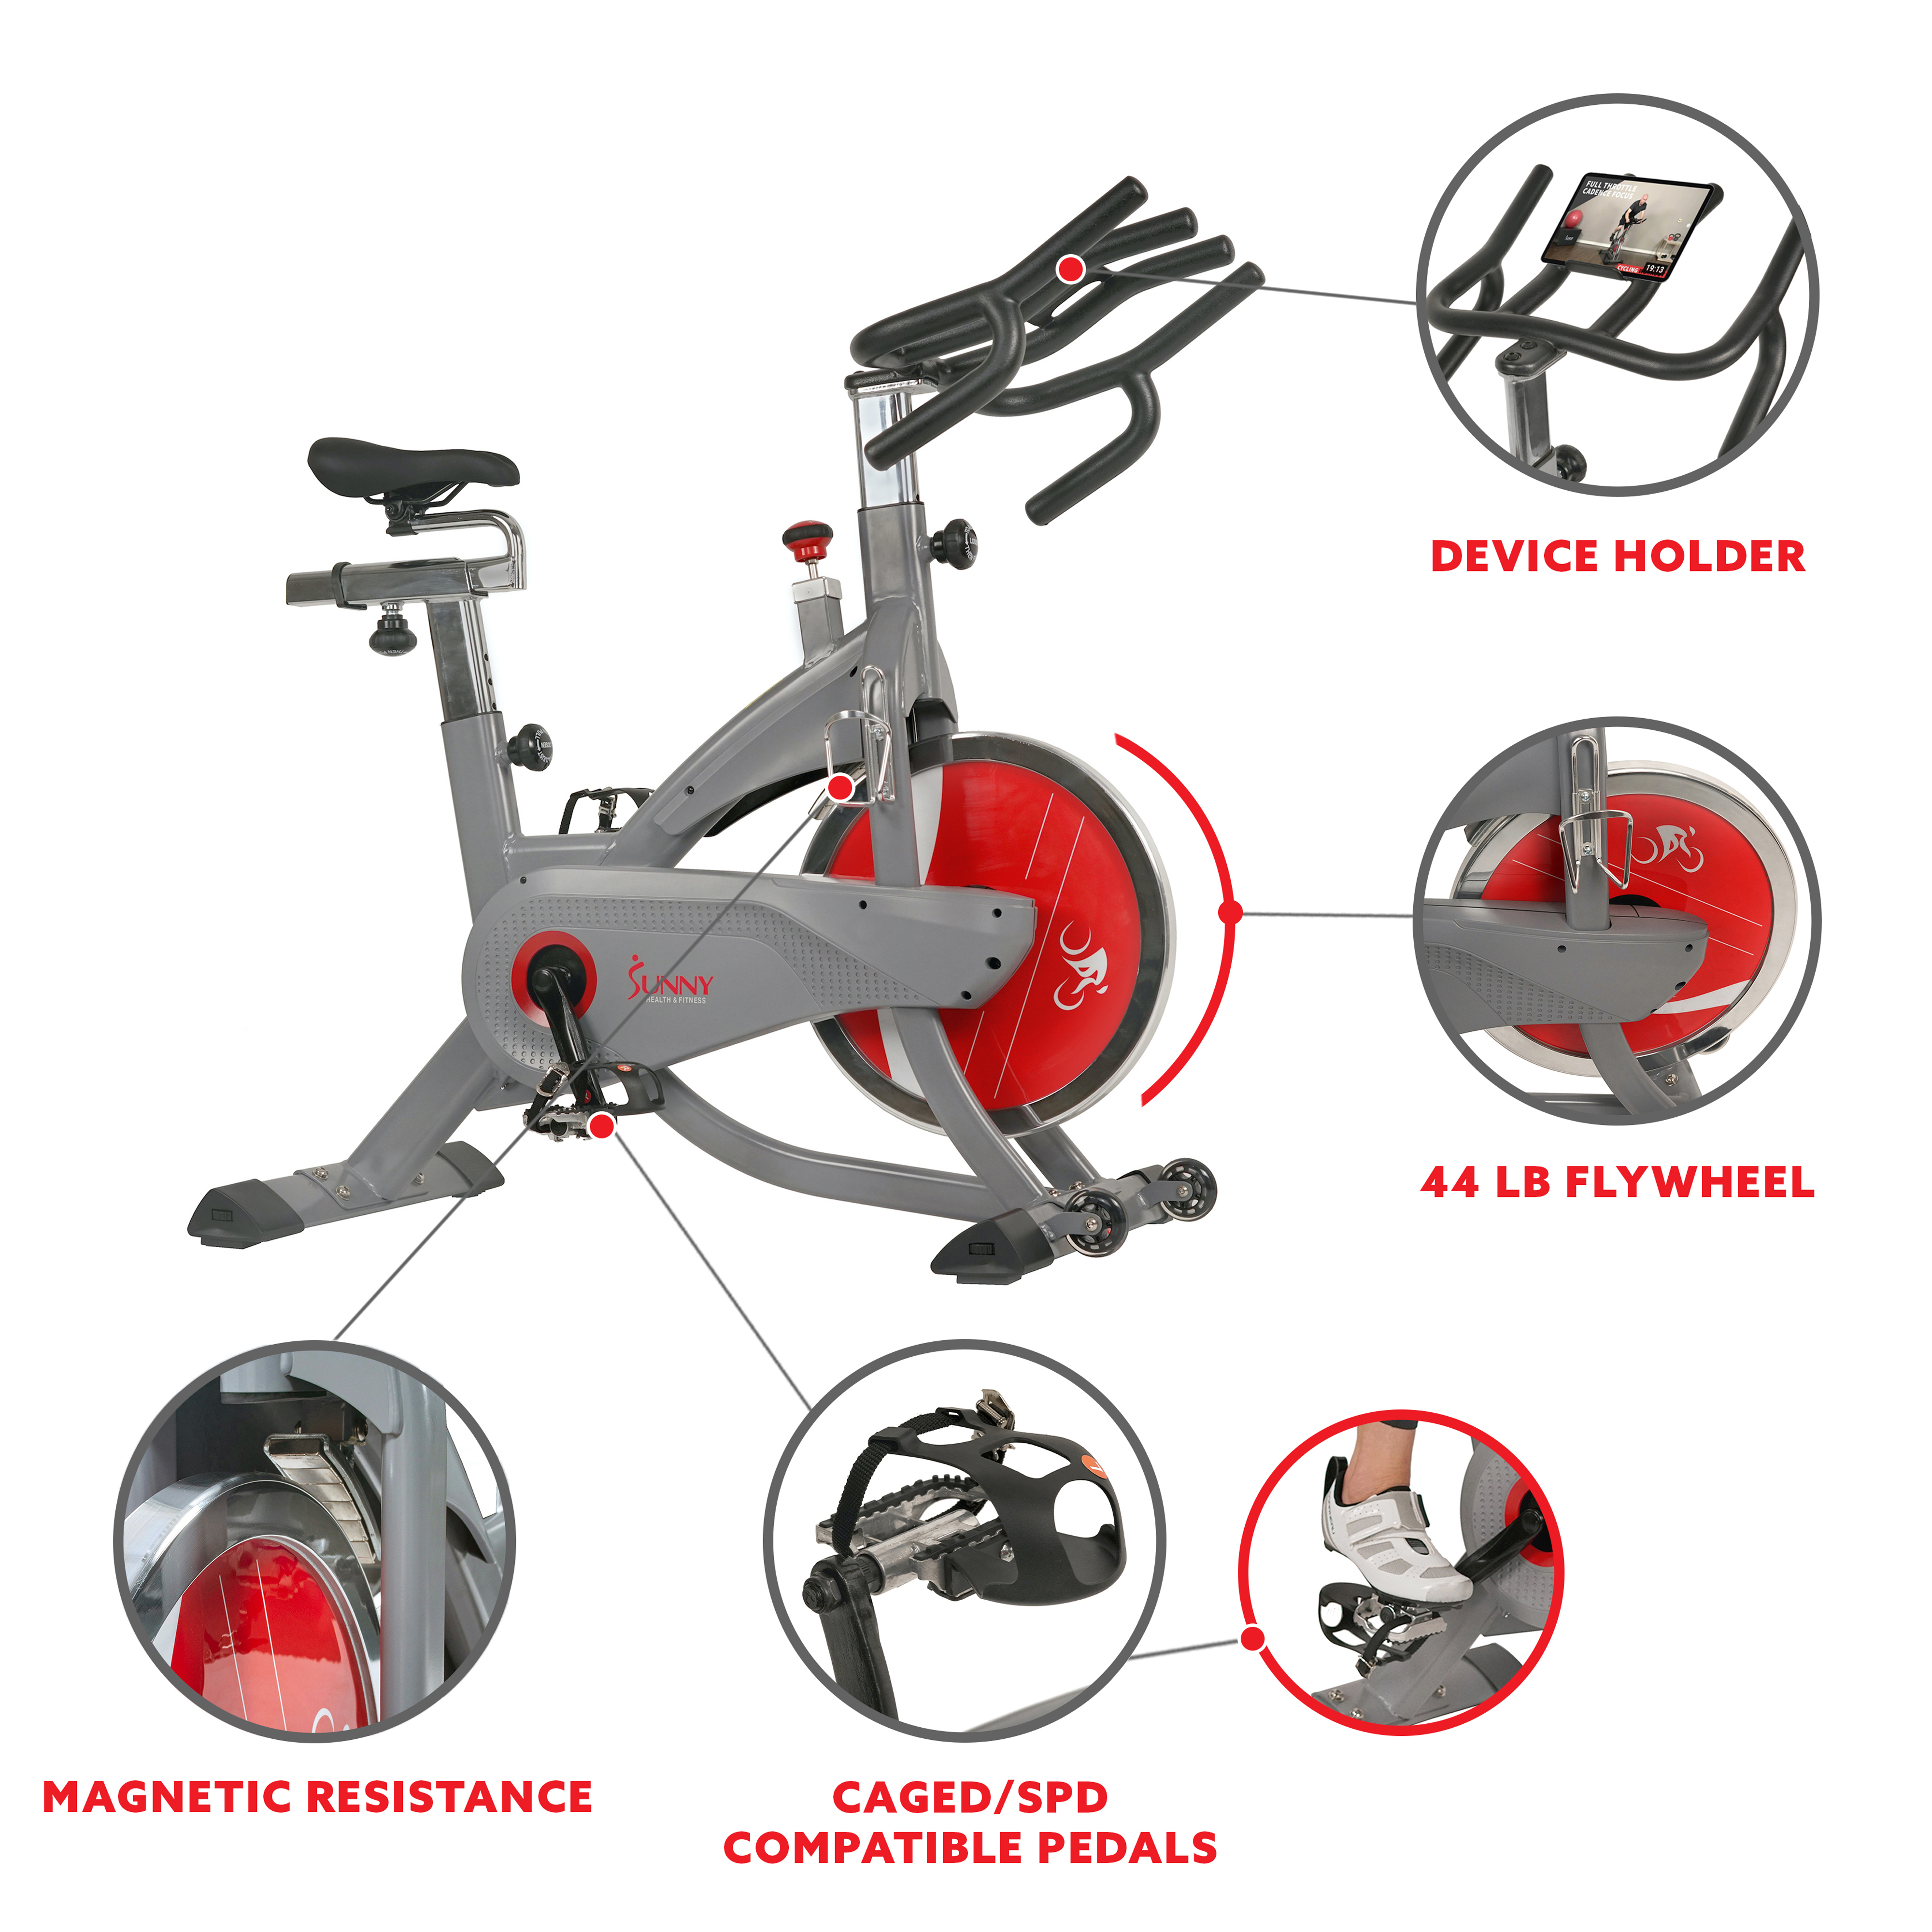 Sunny Health & Fitness AeroPro Stationary Indoor Cycling Exercise Bike with 44 lb Flywheel, Clipped Pedals, Home Cardio, SF-B1711 - image 4 of 11